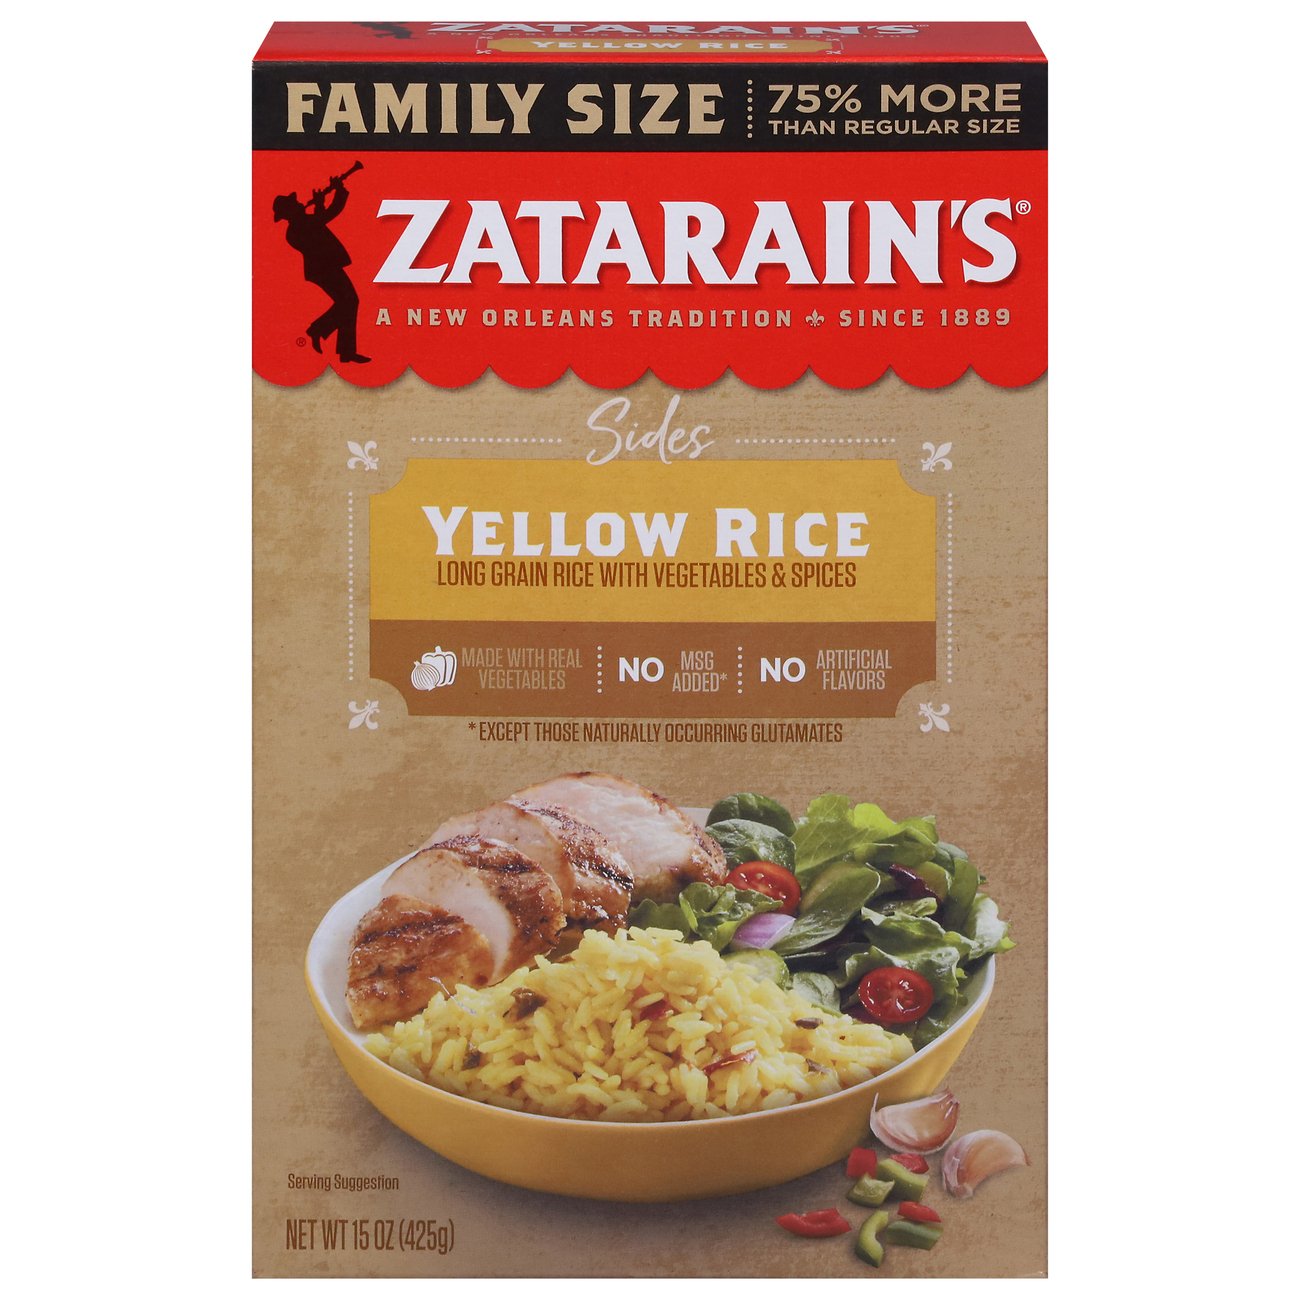 I Cooked Instant Zatarain's Rice in the Rice Steamer